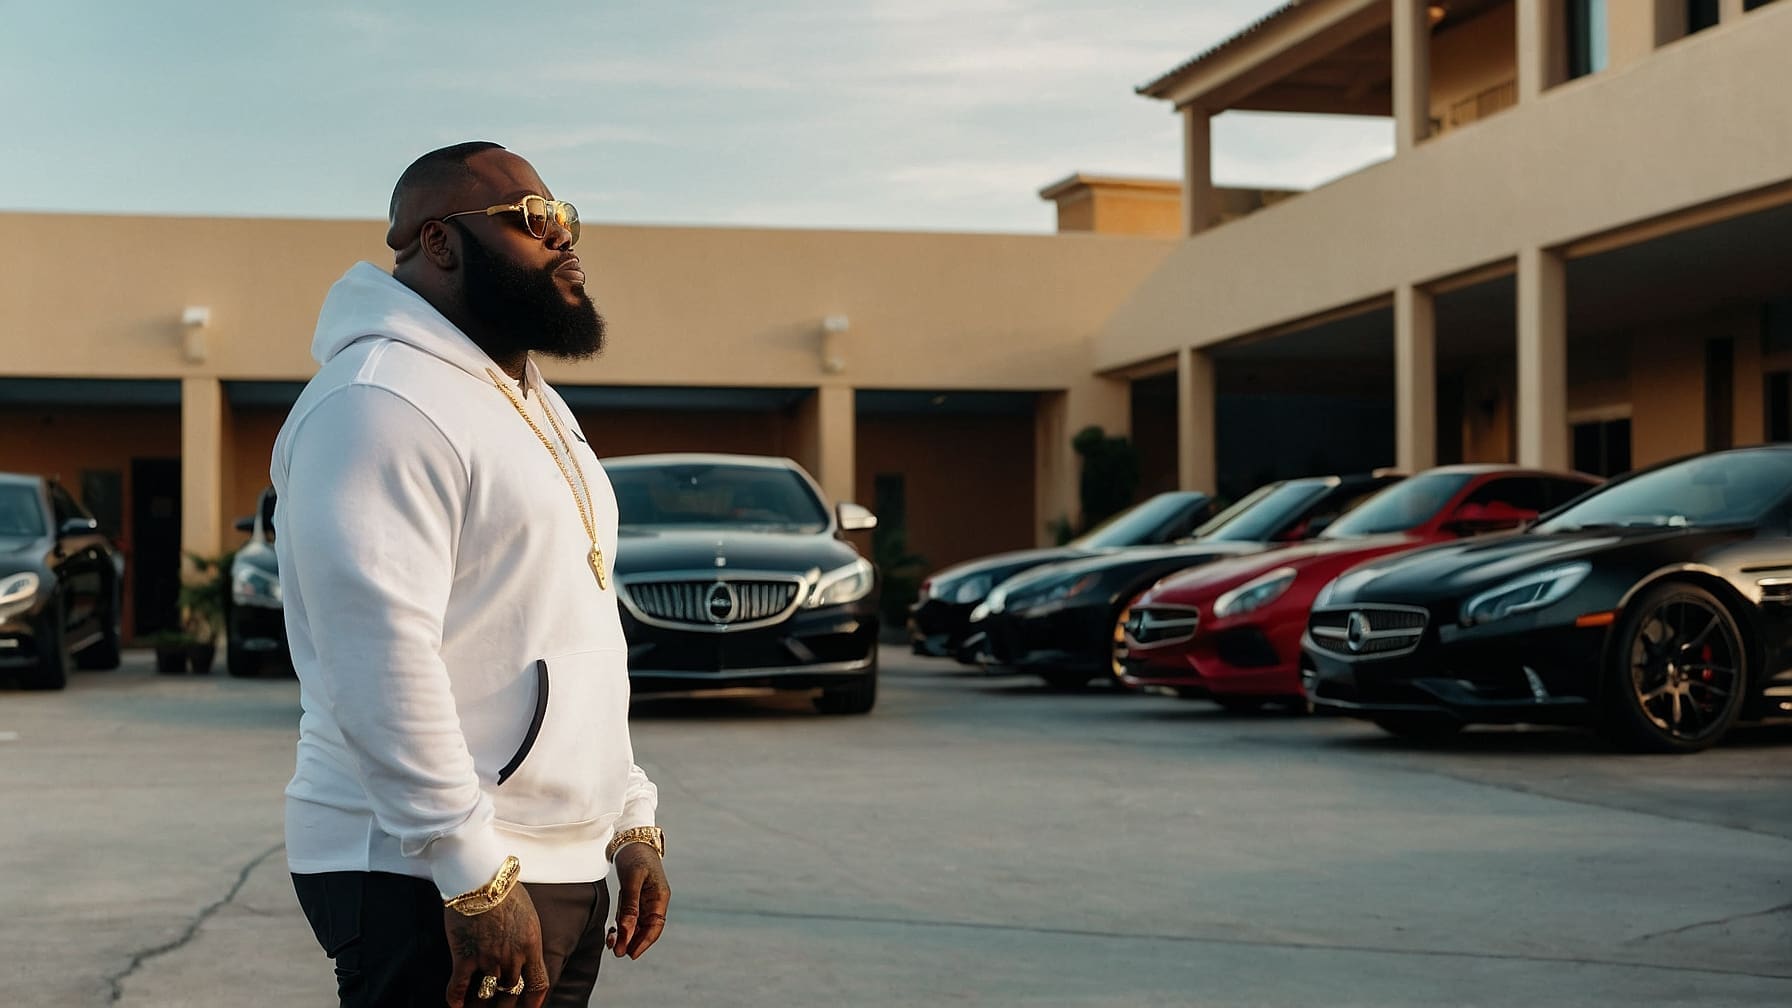 Rick_Ross_standing_and_alot_of_luxury_cars_in_behind_h